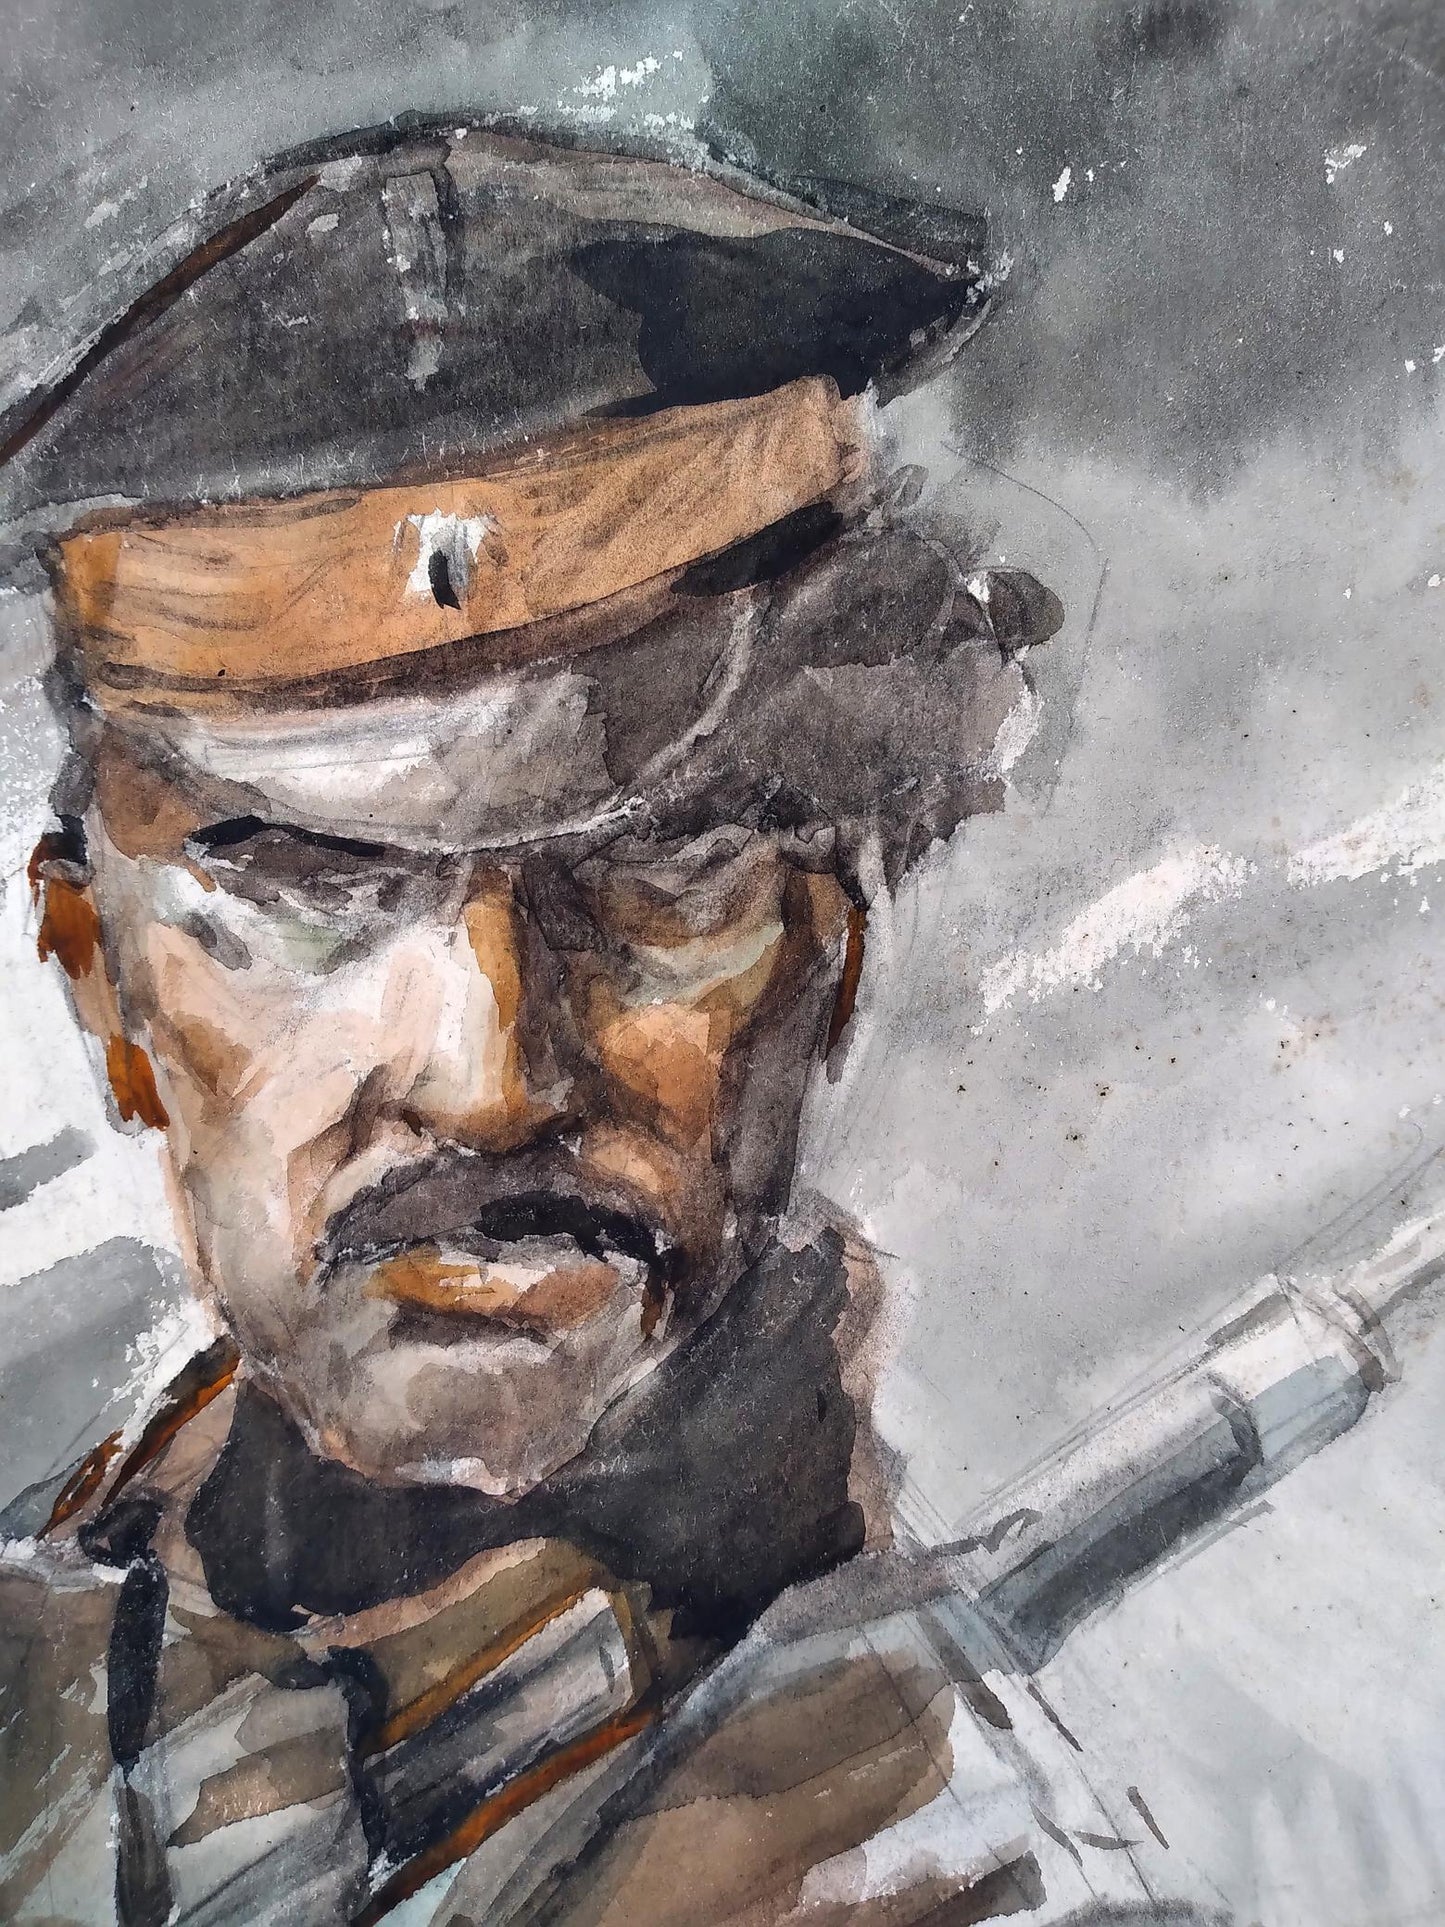 Oleg Litvinov's watercolor painting capturing a "Portrait of a Soldier by the River"